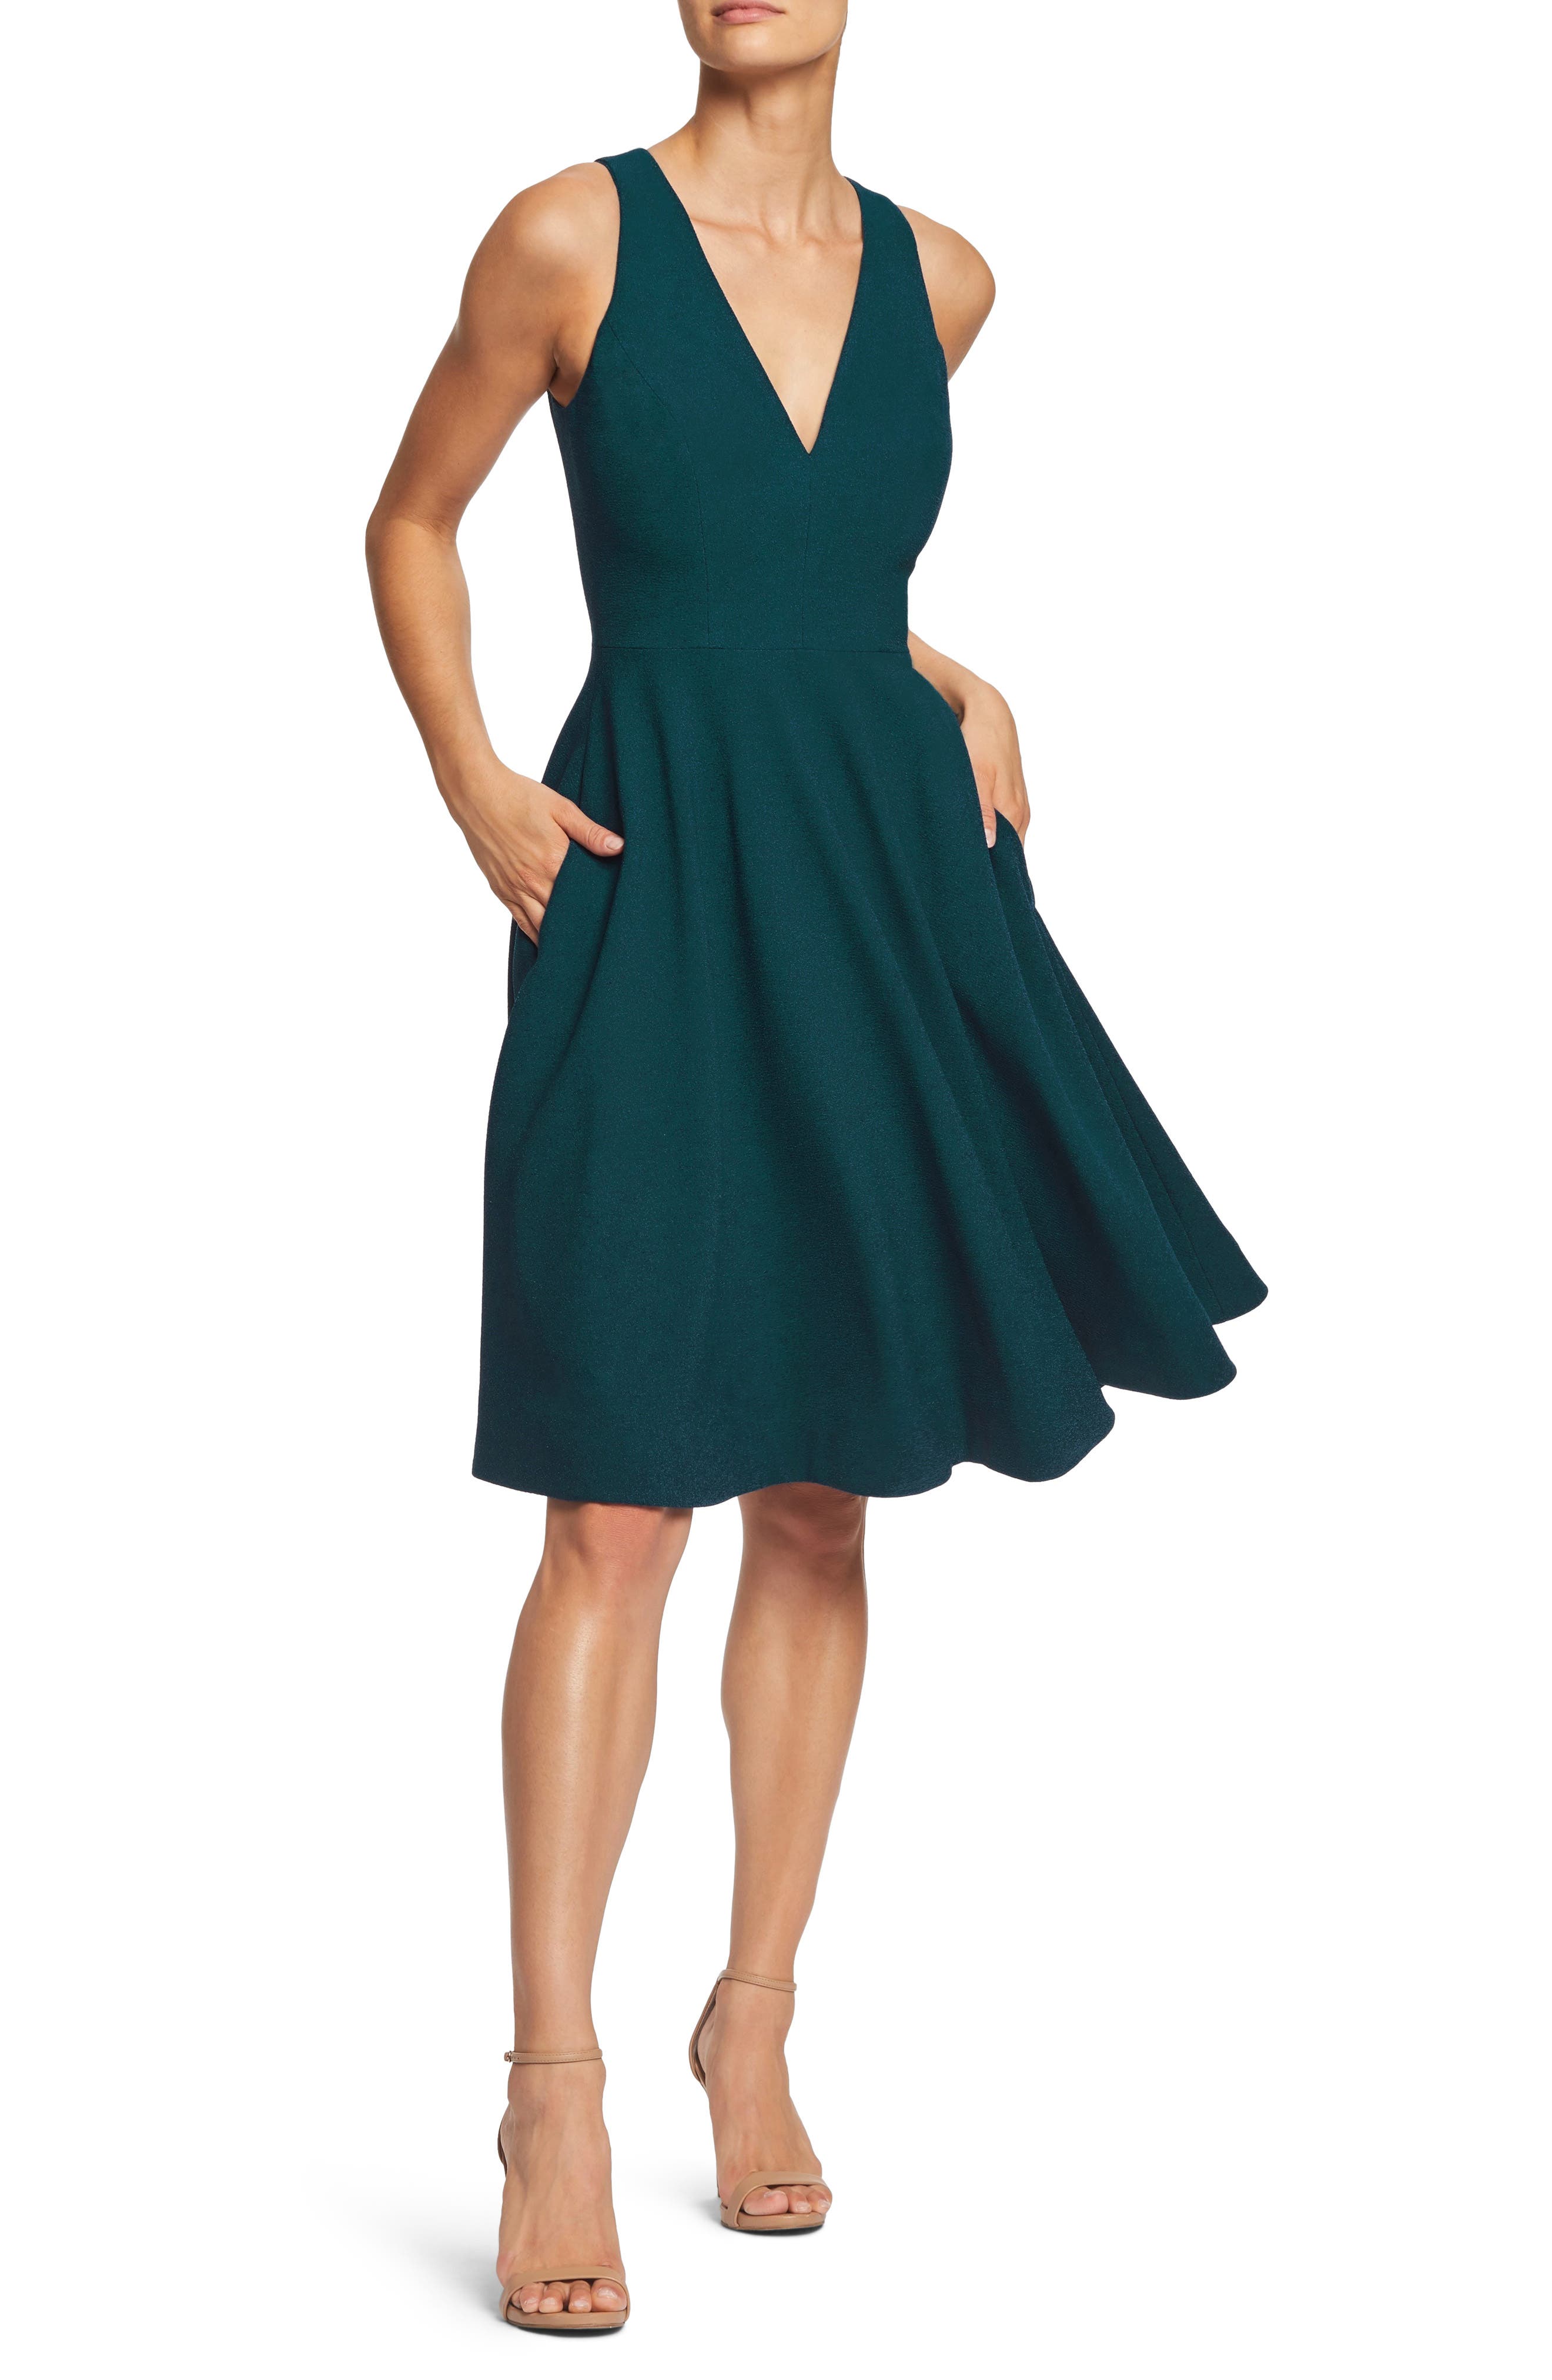 Green Cocktail Dresses ☀ Party Dresses ...